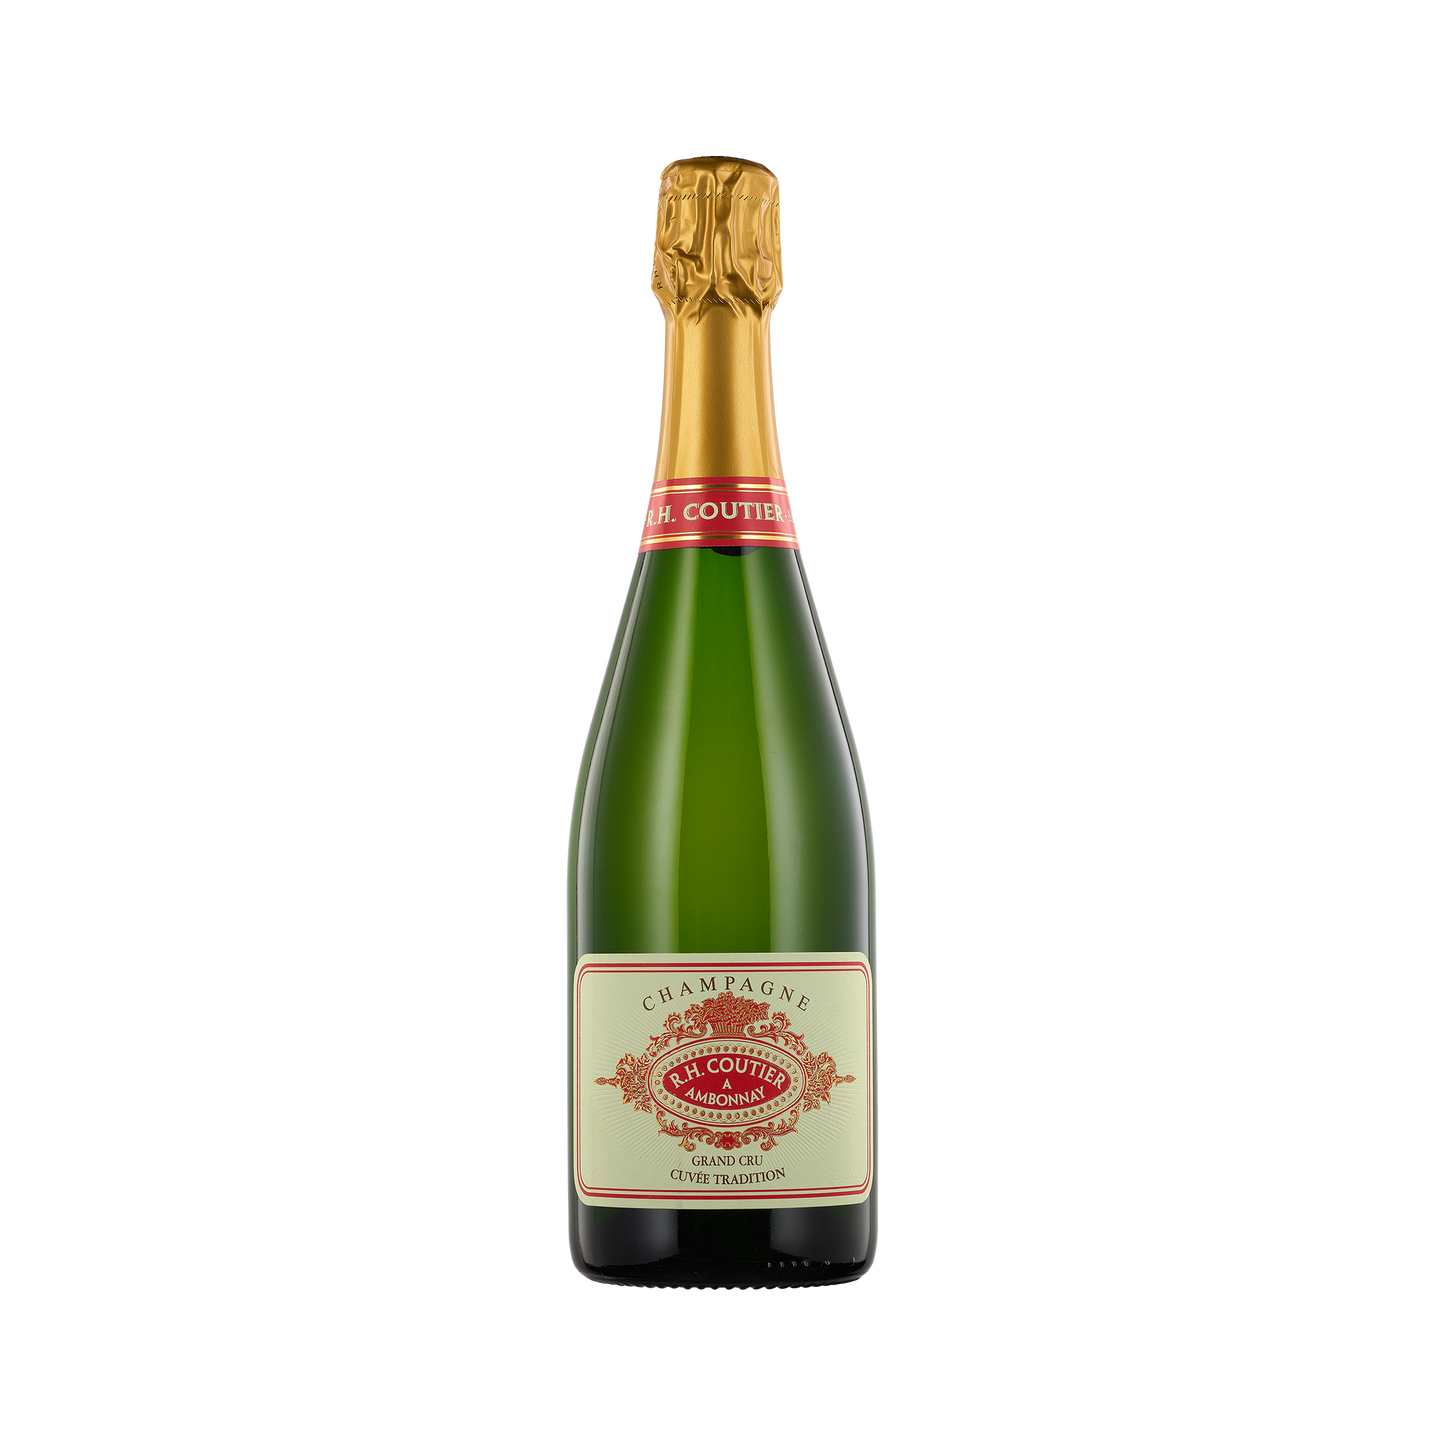 A bottle of R.H. Coutier 'Brut Tradition' Champagne